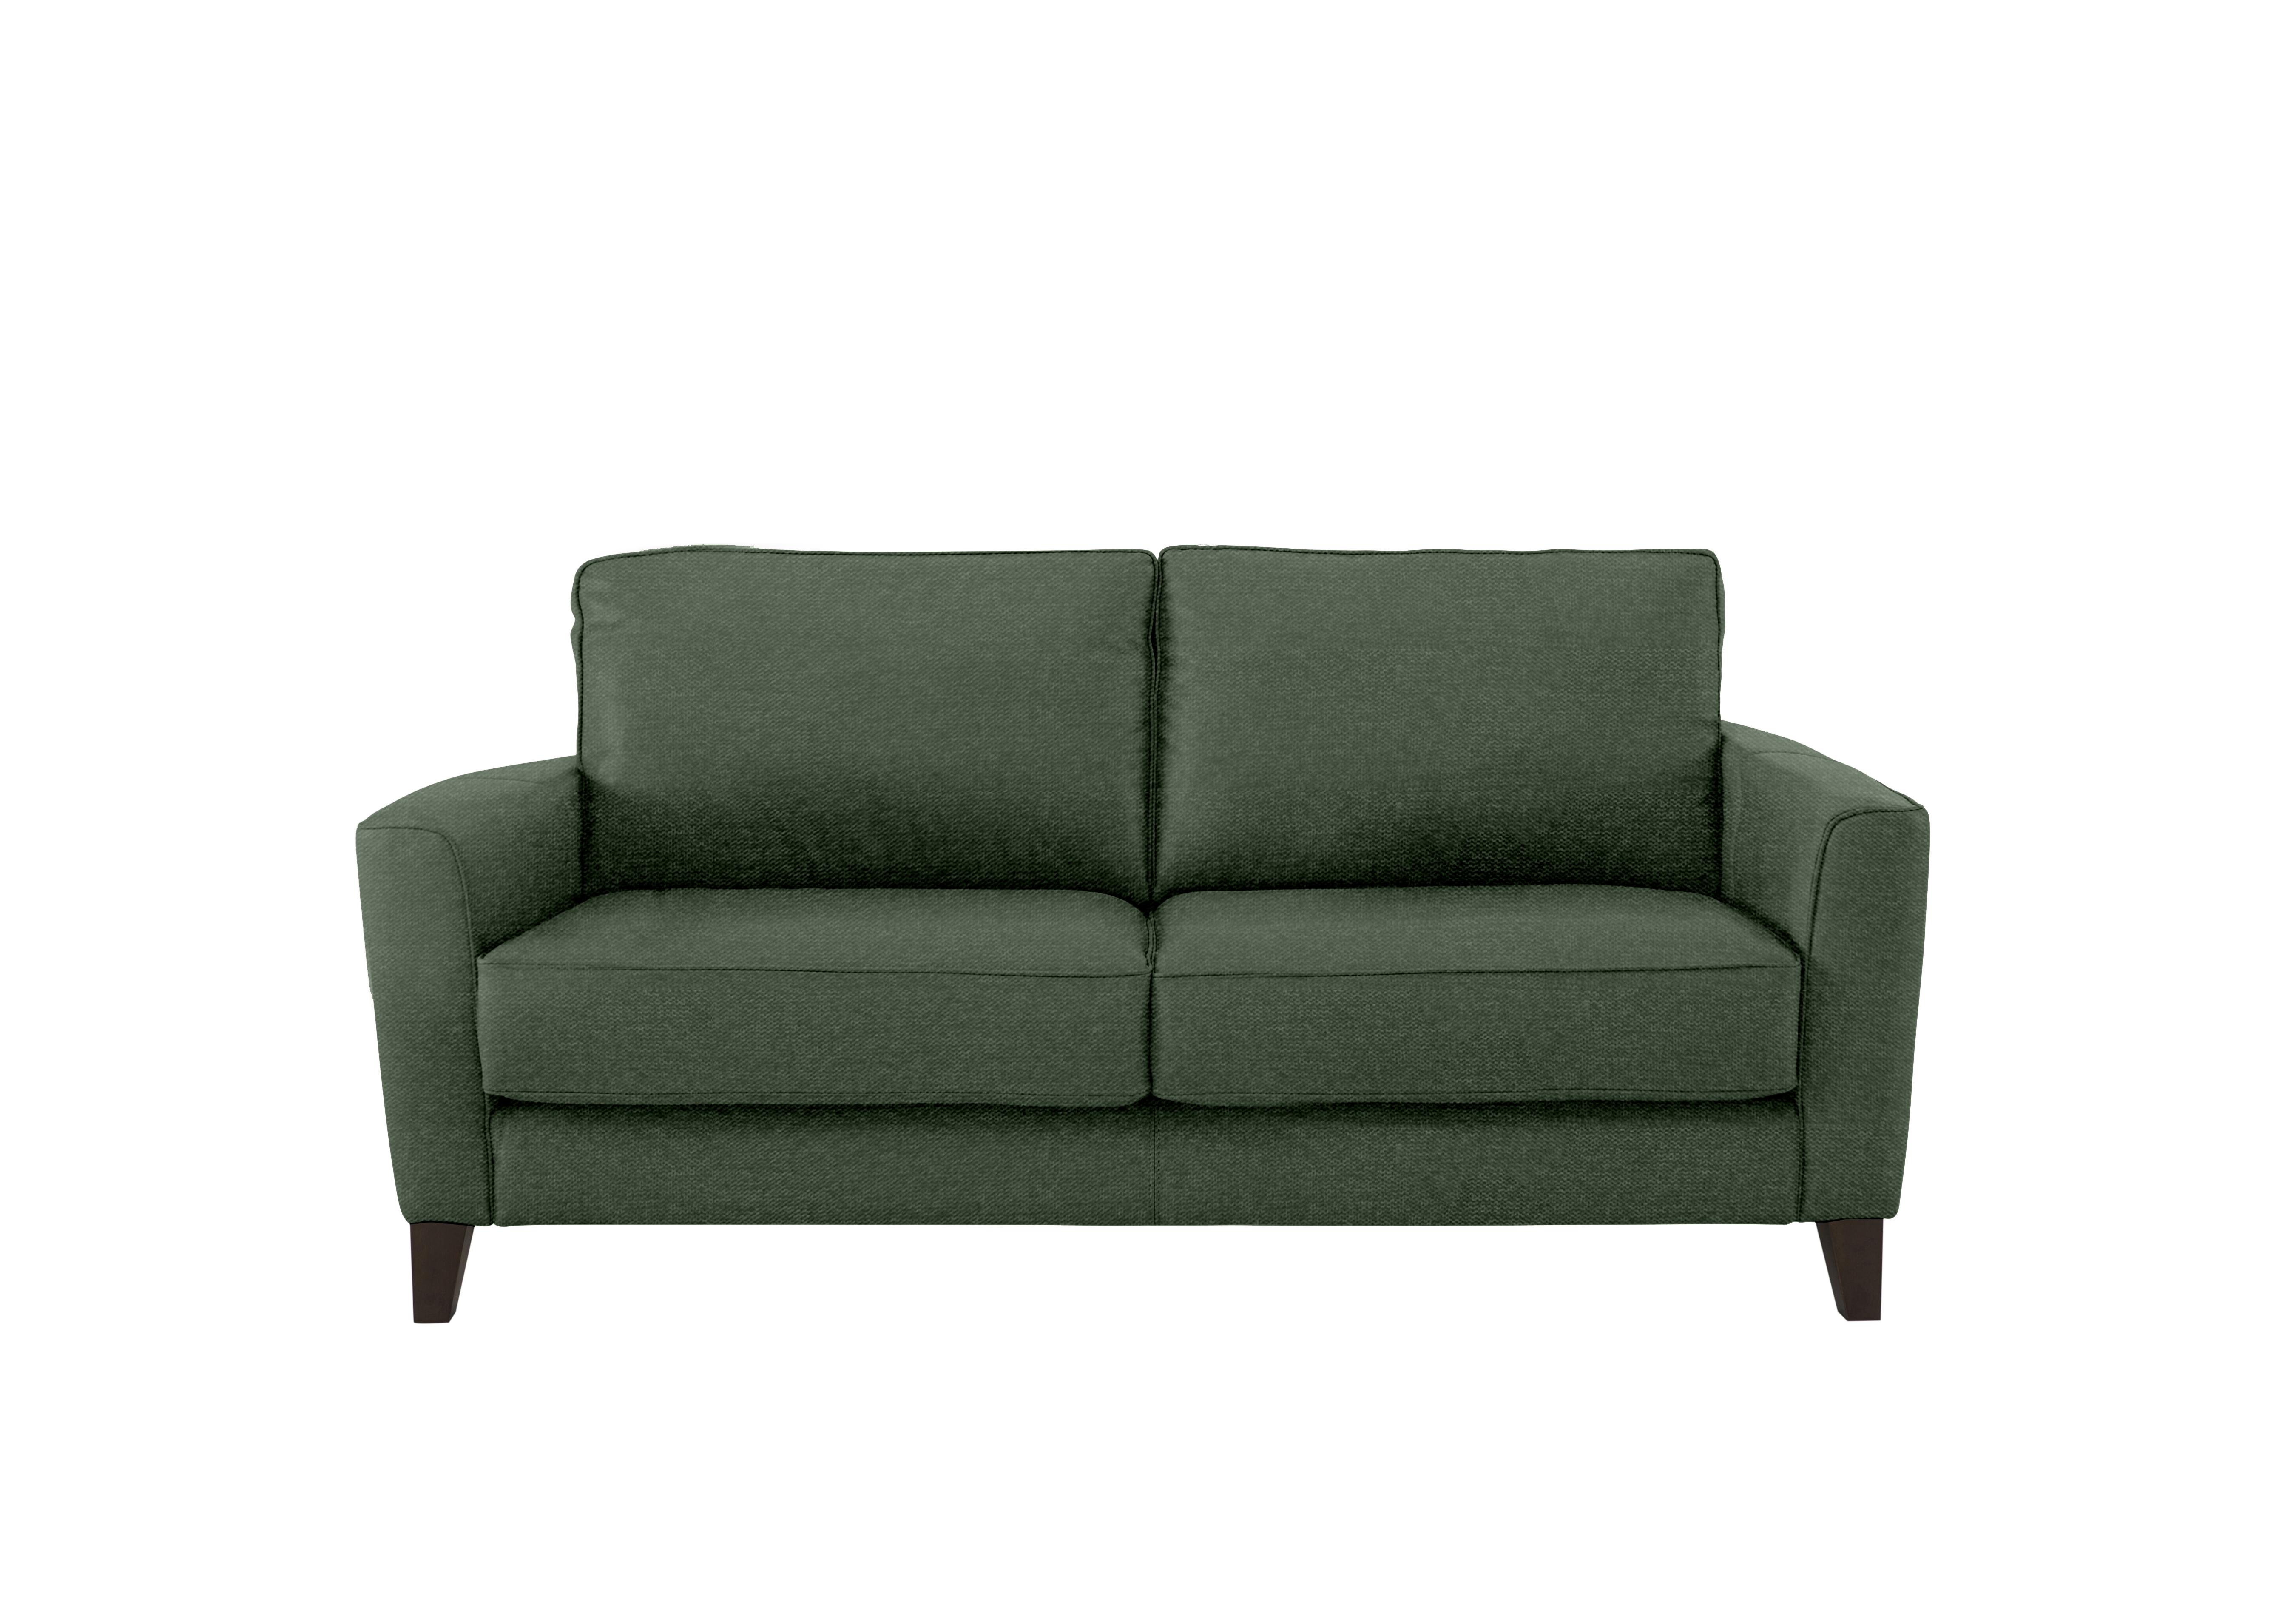 Brondby 2 Seater Fabric Sofa in Fab-Ska-R48 Moss Green on Furniture Village